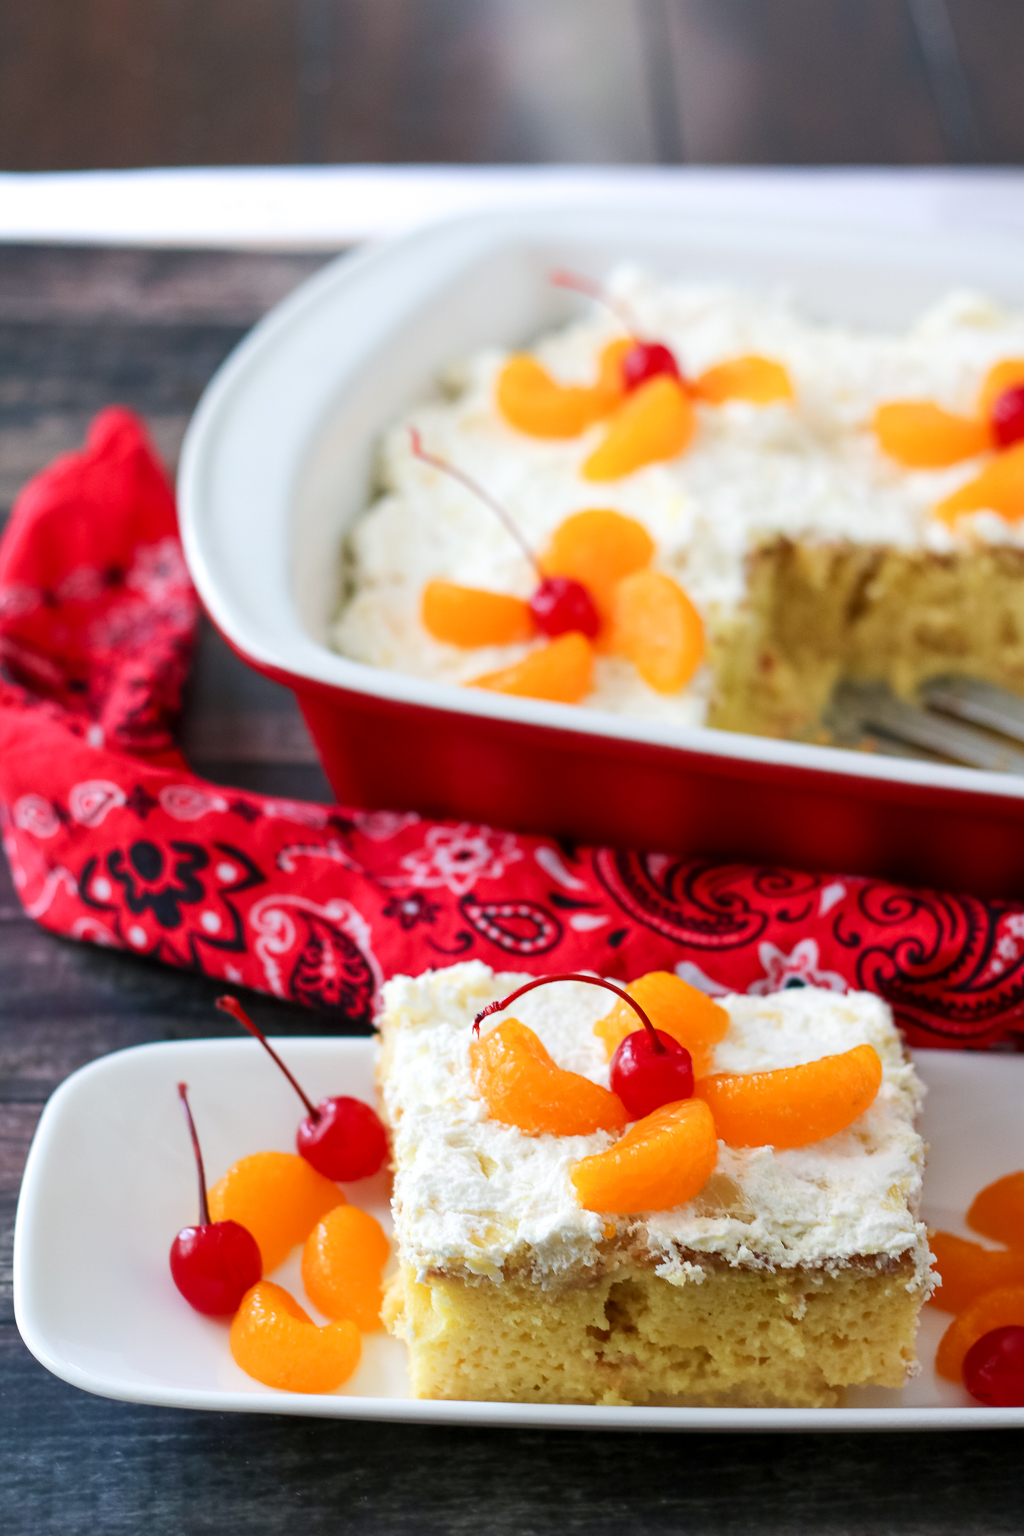 Pig Pickin’ Tres Leches Cake